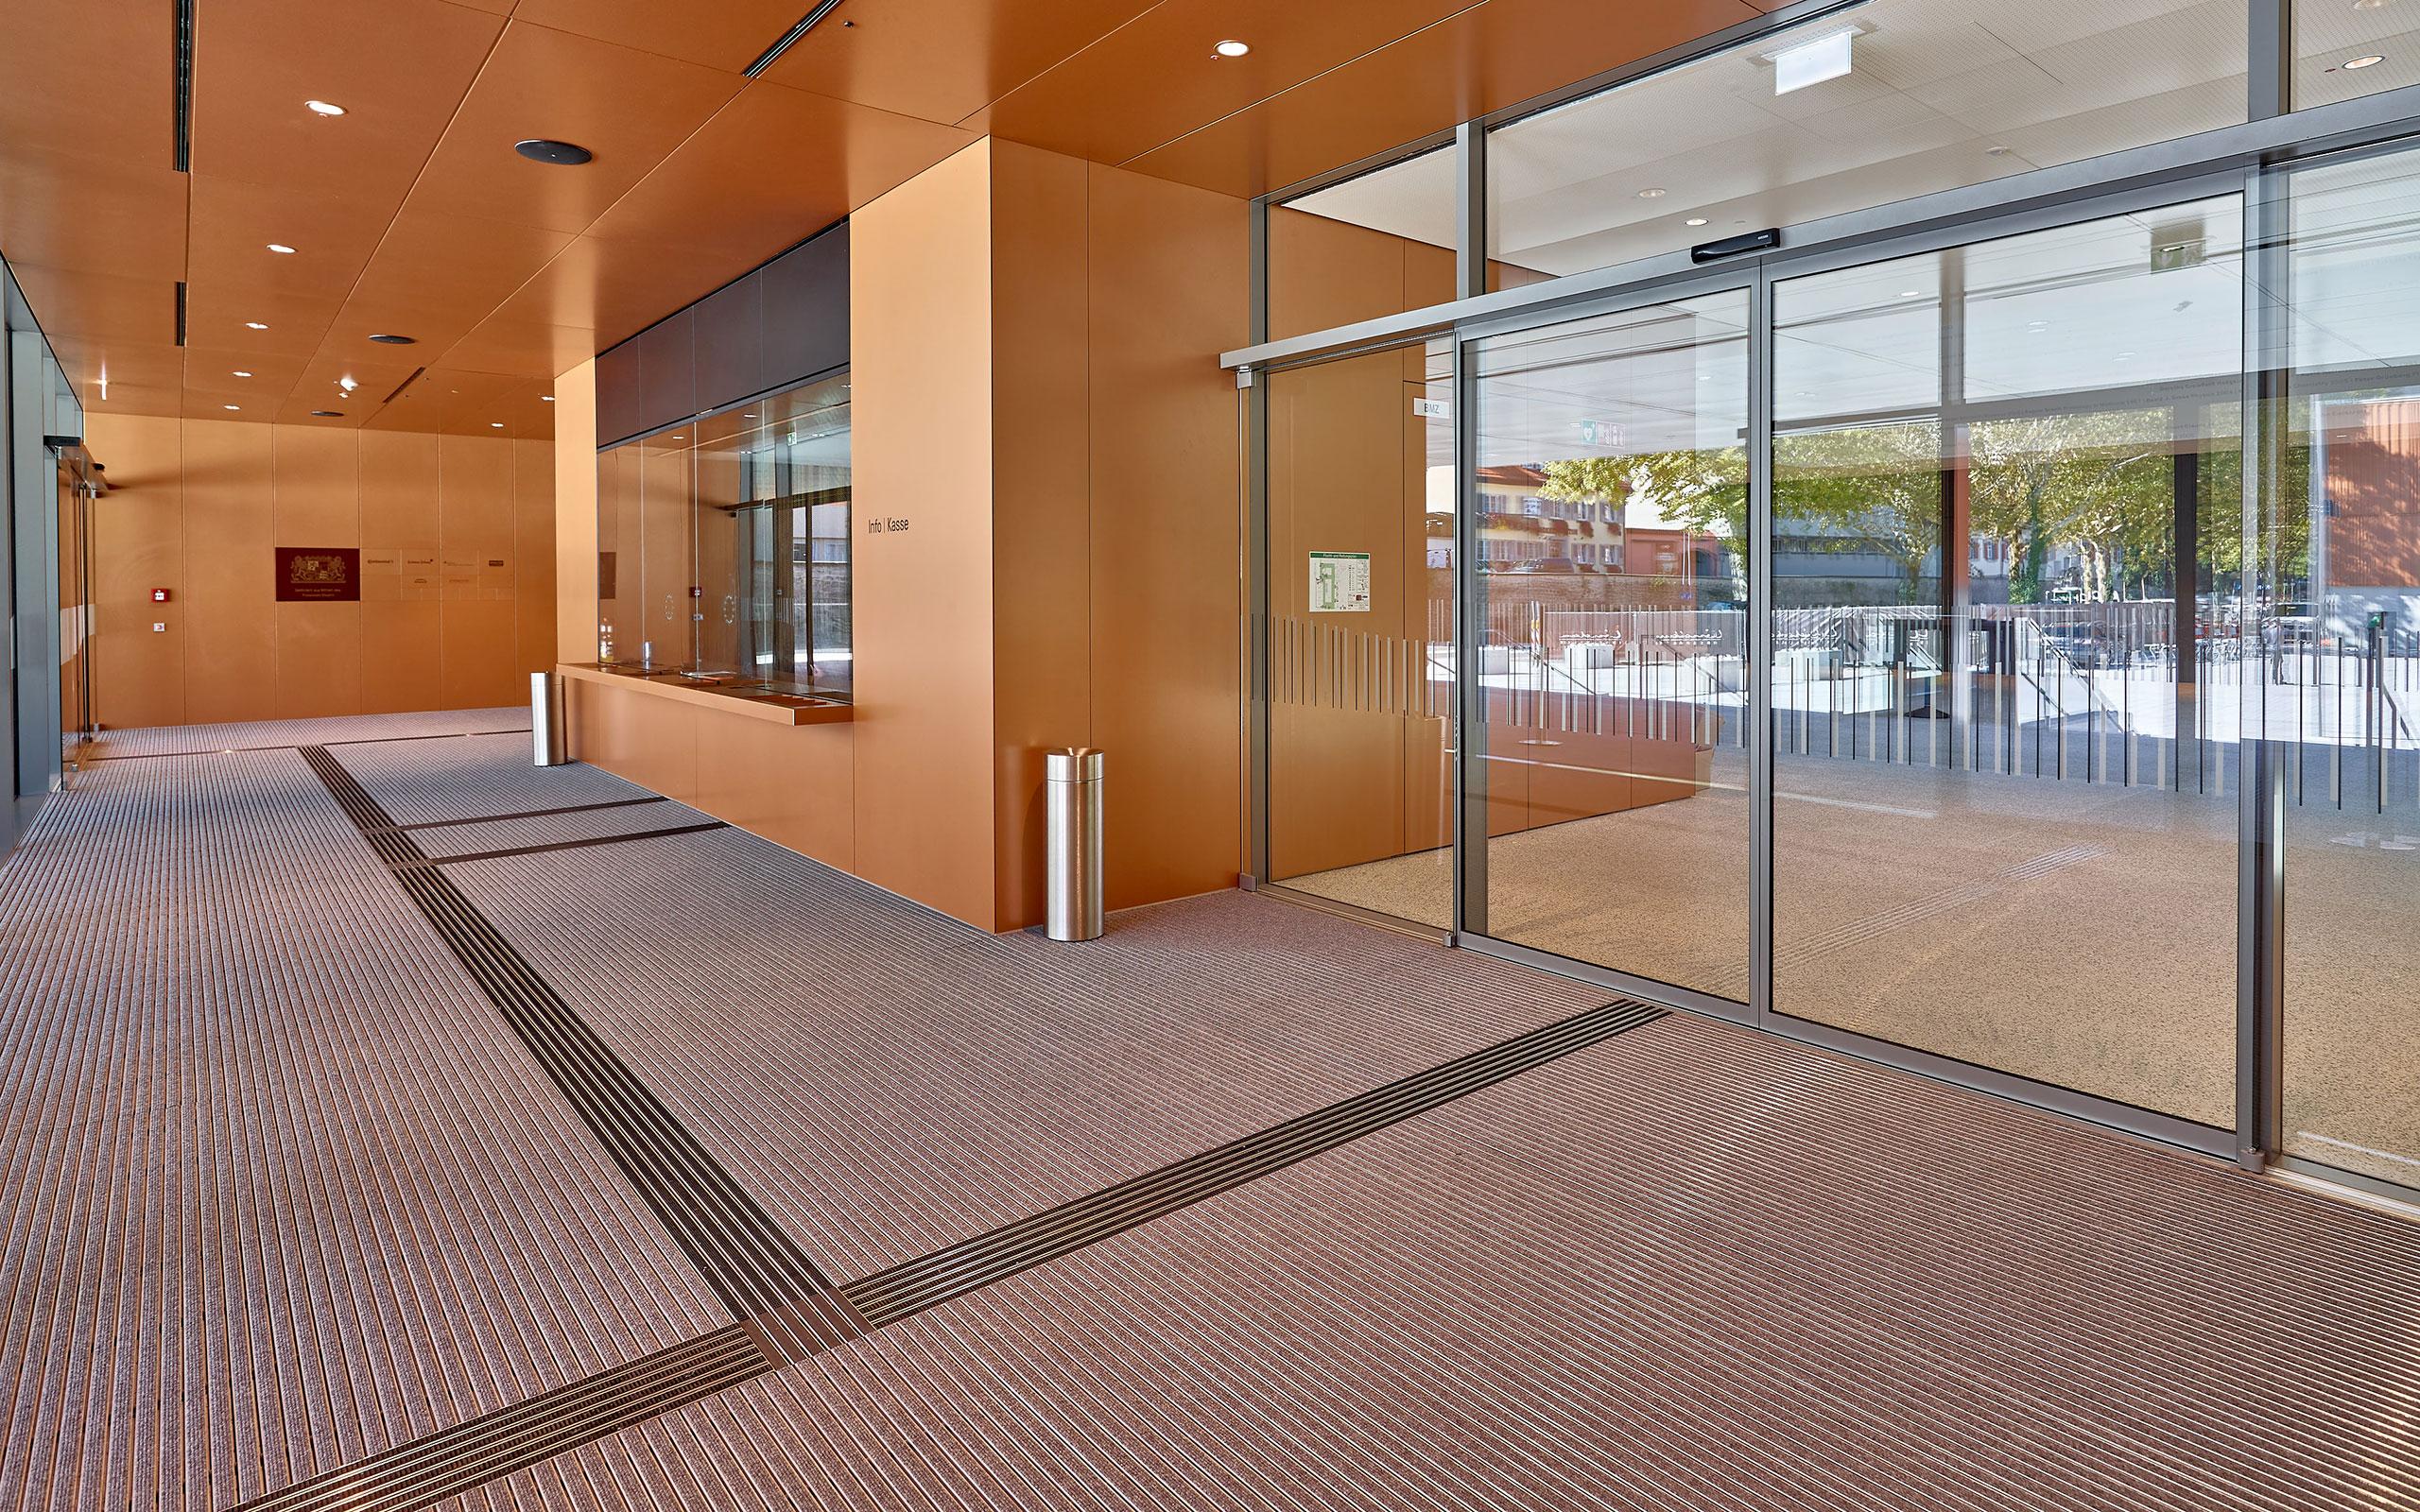 Sport, Event and Congress Centre entrance matting systems